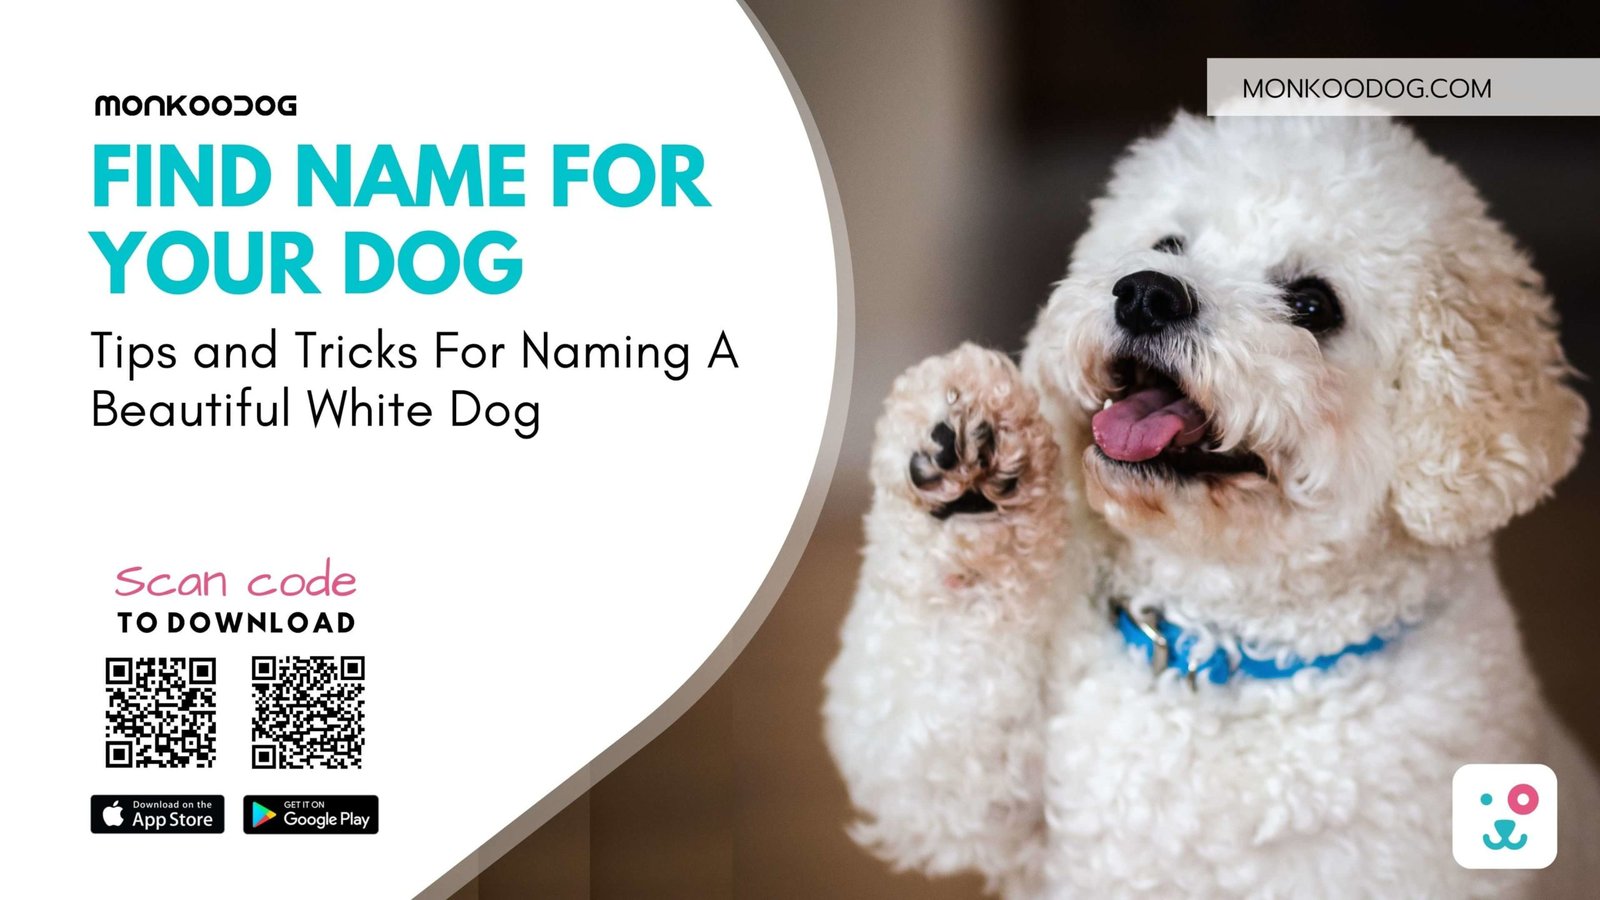 Tips and Tricks For Naming A Beautiful White Dog